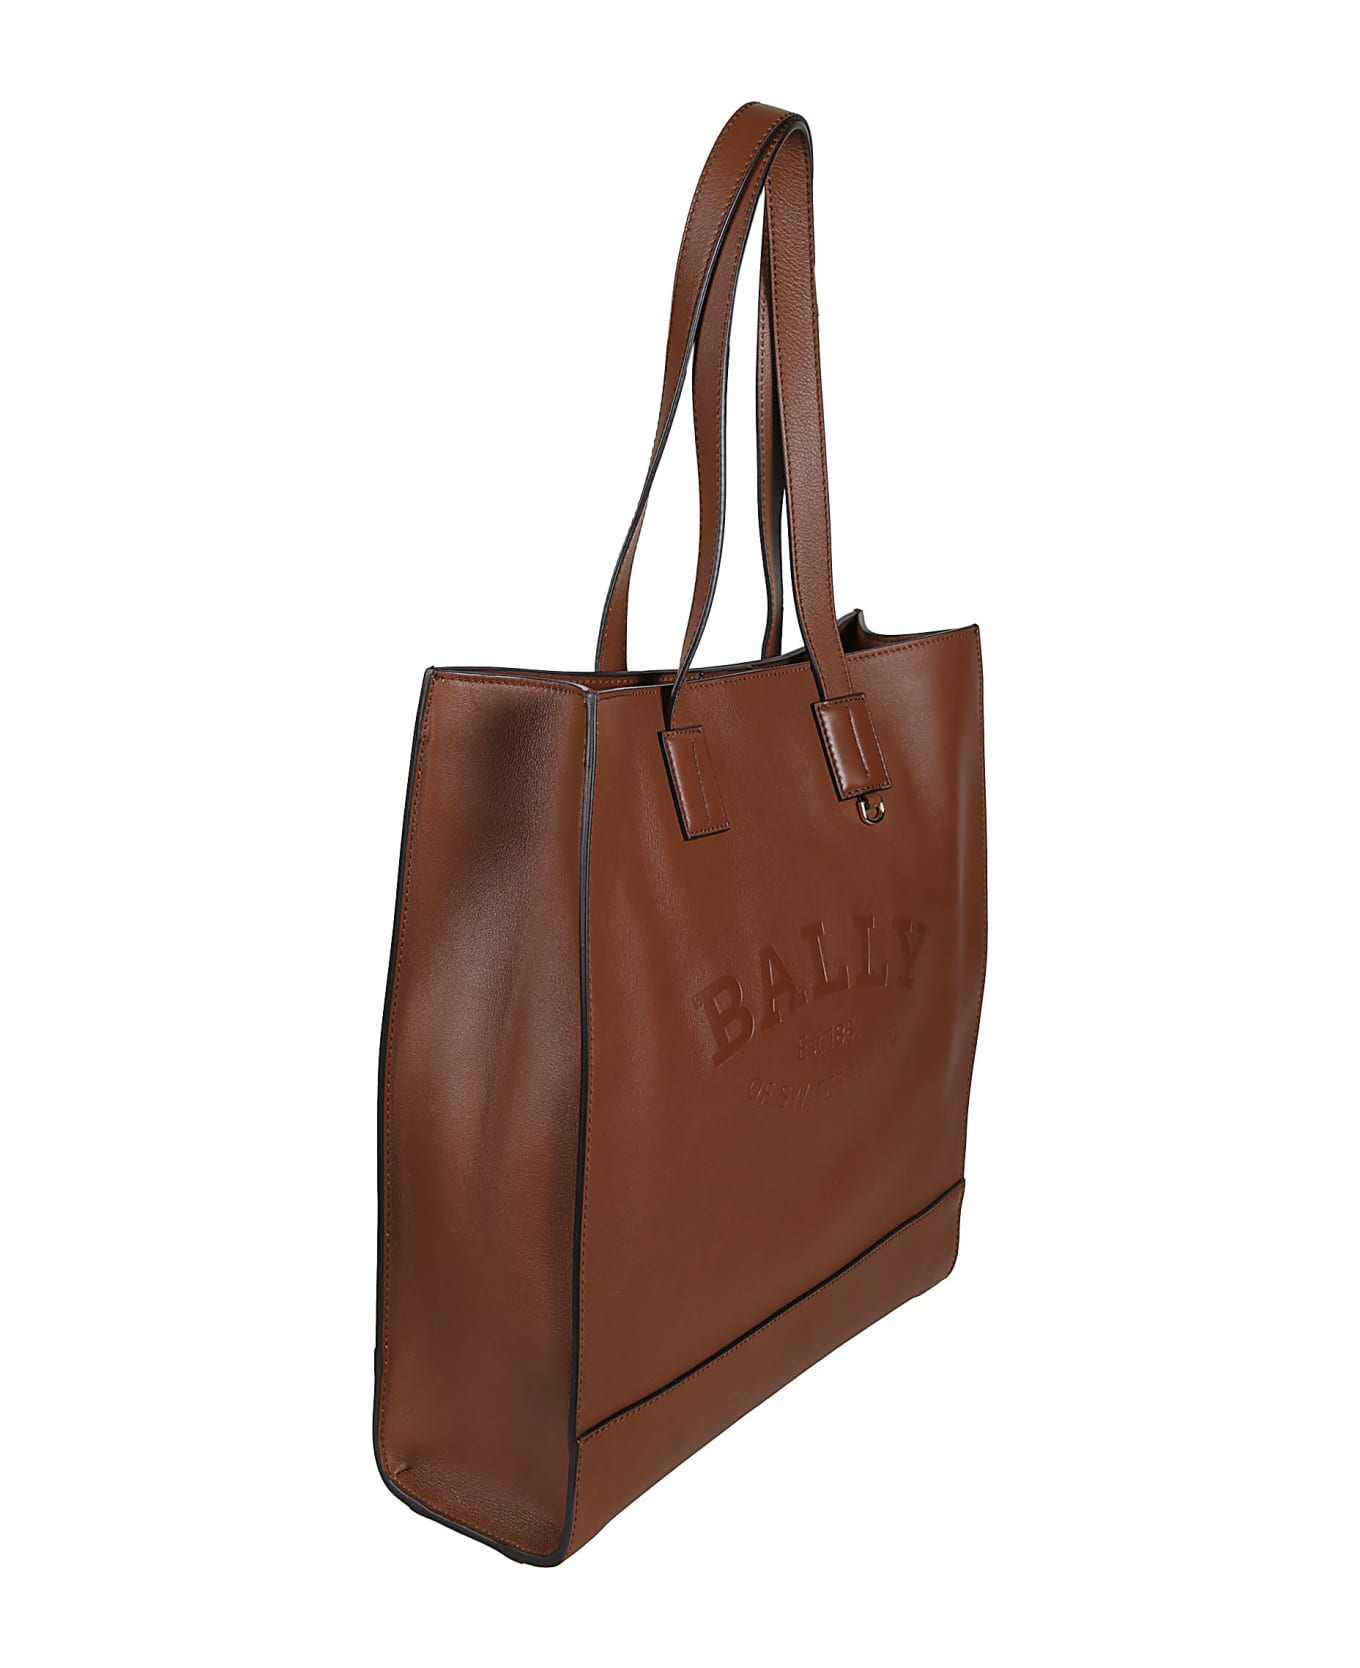 Bally Logo Engraved Tote - Cuoio トートバッグ